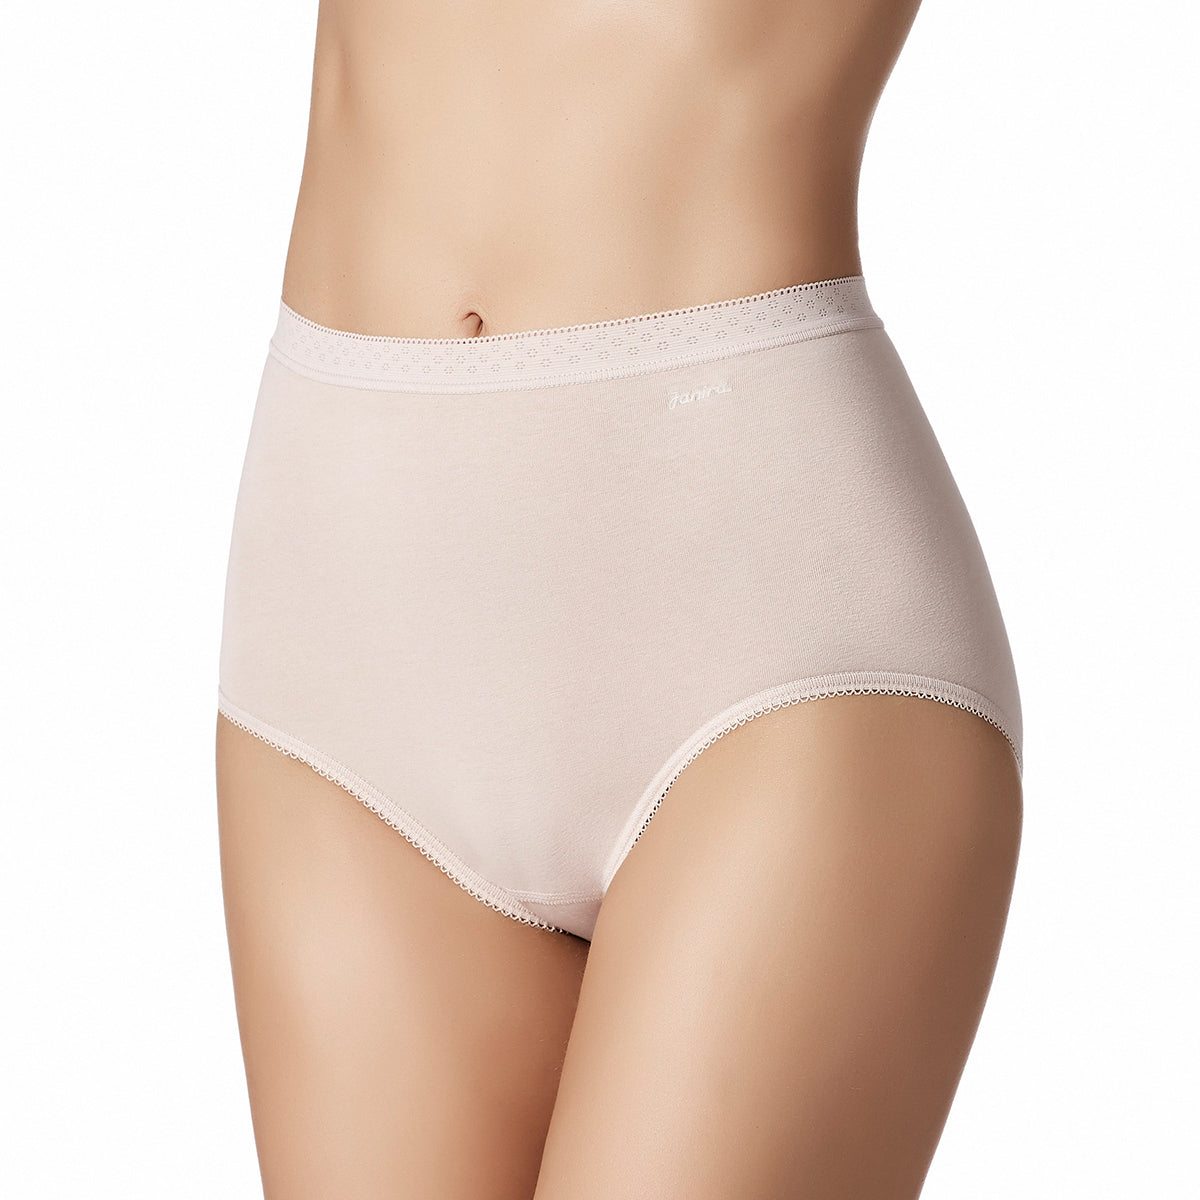 100% Combed Cotton 2 pack Directoire Briefs - Suzanne Charles